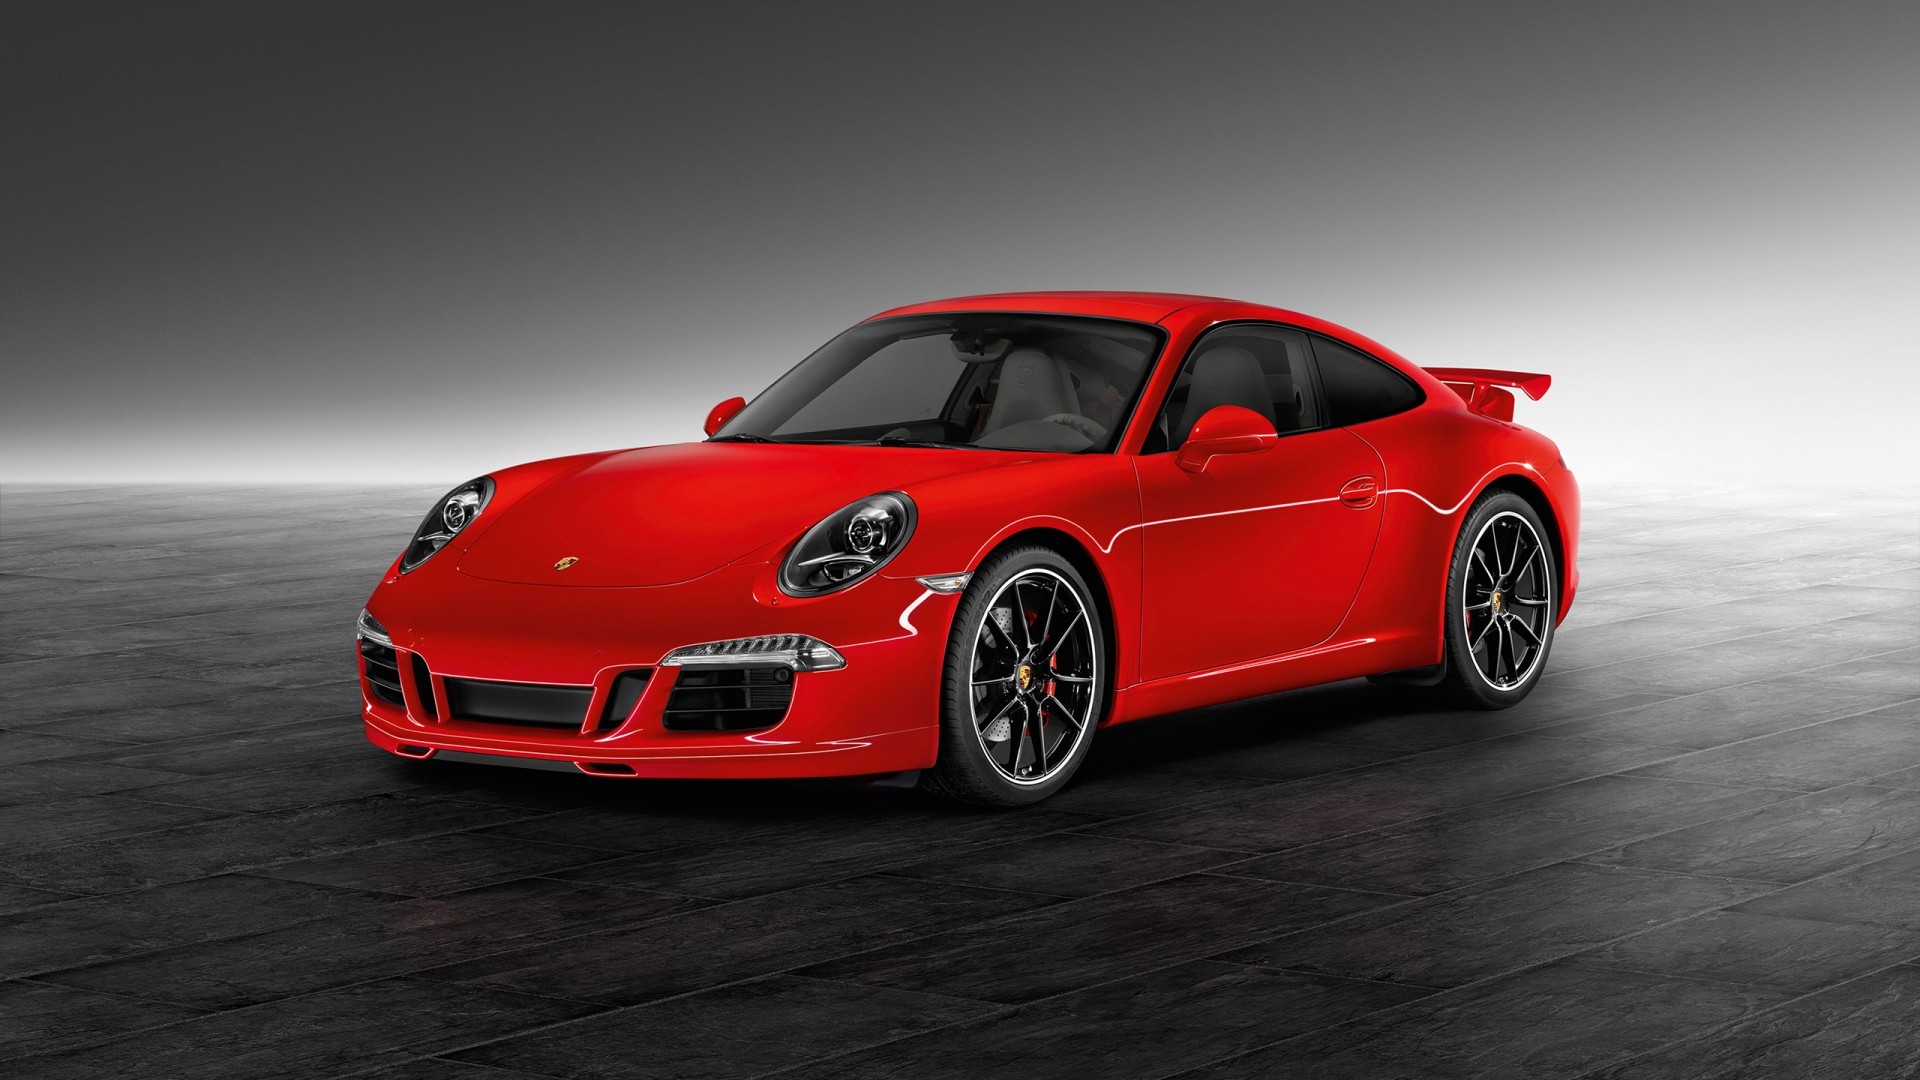 Amazing Red Porsche Pictures & Backgrounds